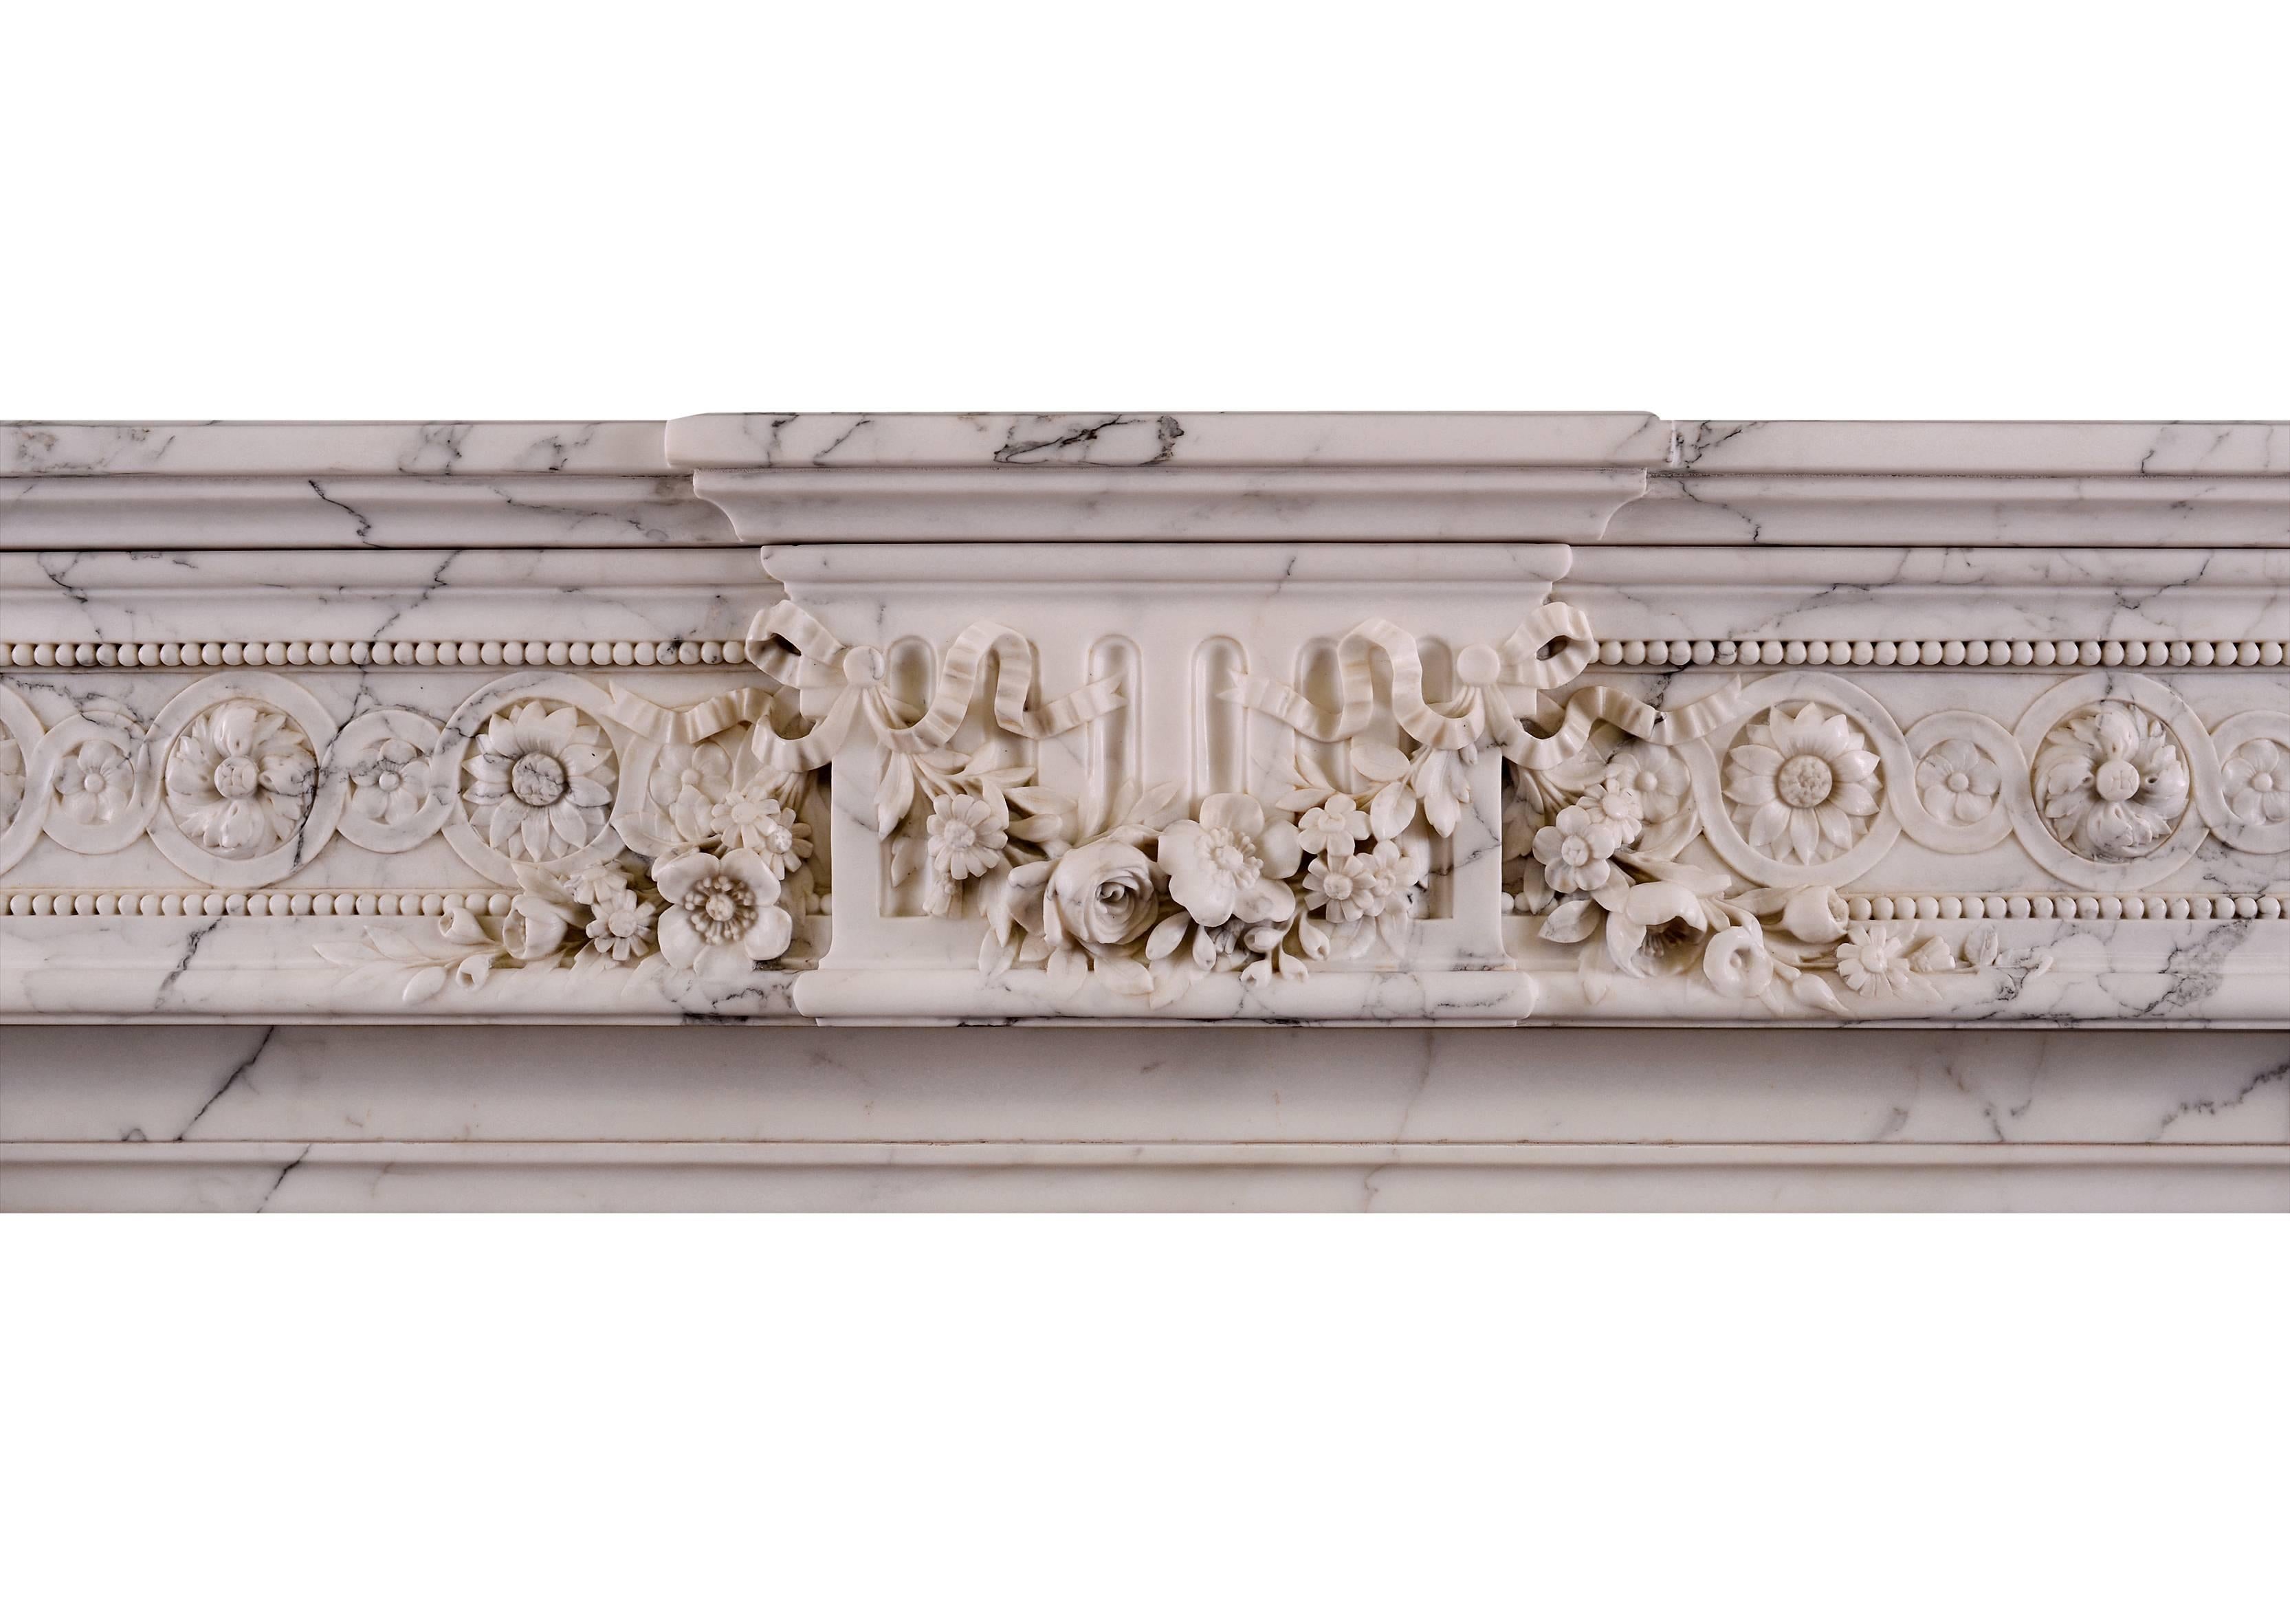 A fine quality 19th century, circa 1830 French Louis XVI fireplace in veined Statuario marble. The frieze carved with flutes, exquisitely carved to the centre with fruit, flowers and ribbons. The acanthus leaf jambs with rope moulding below,